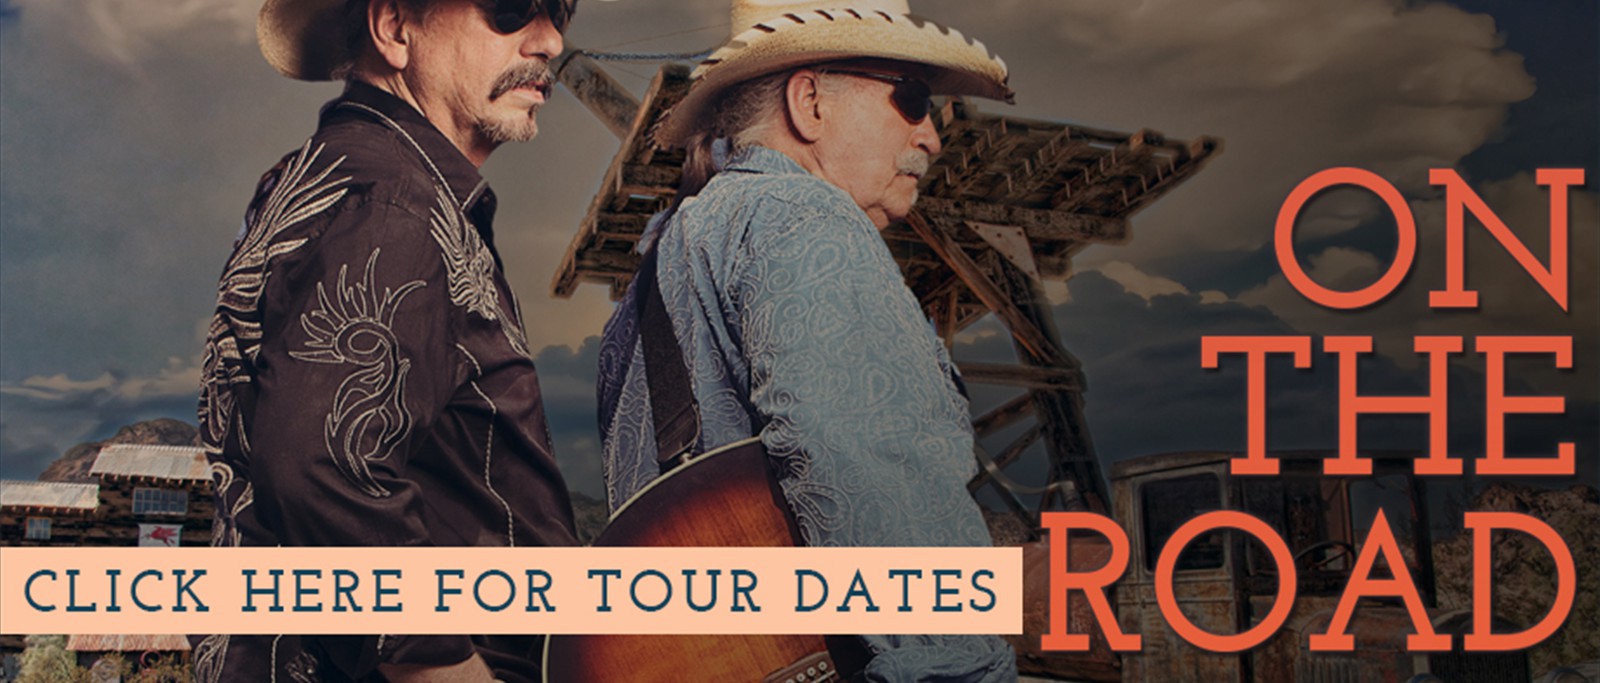 Bellamy Brothers on Tour